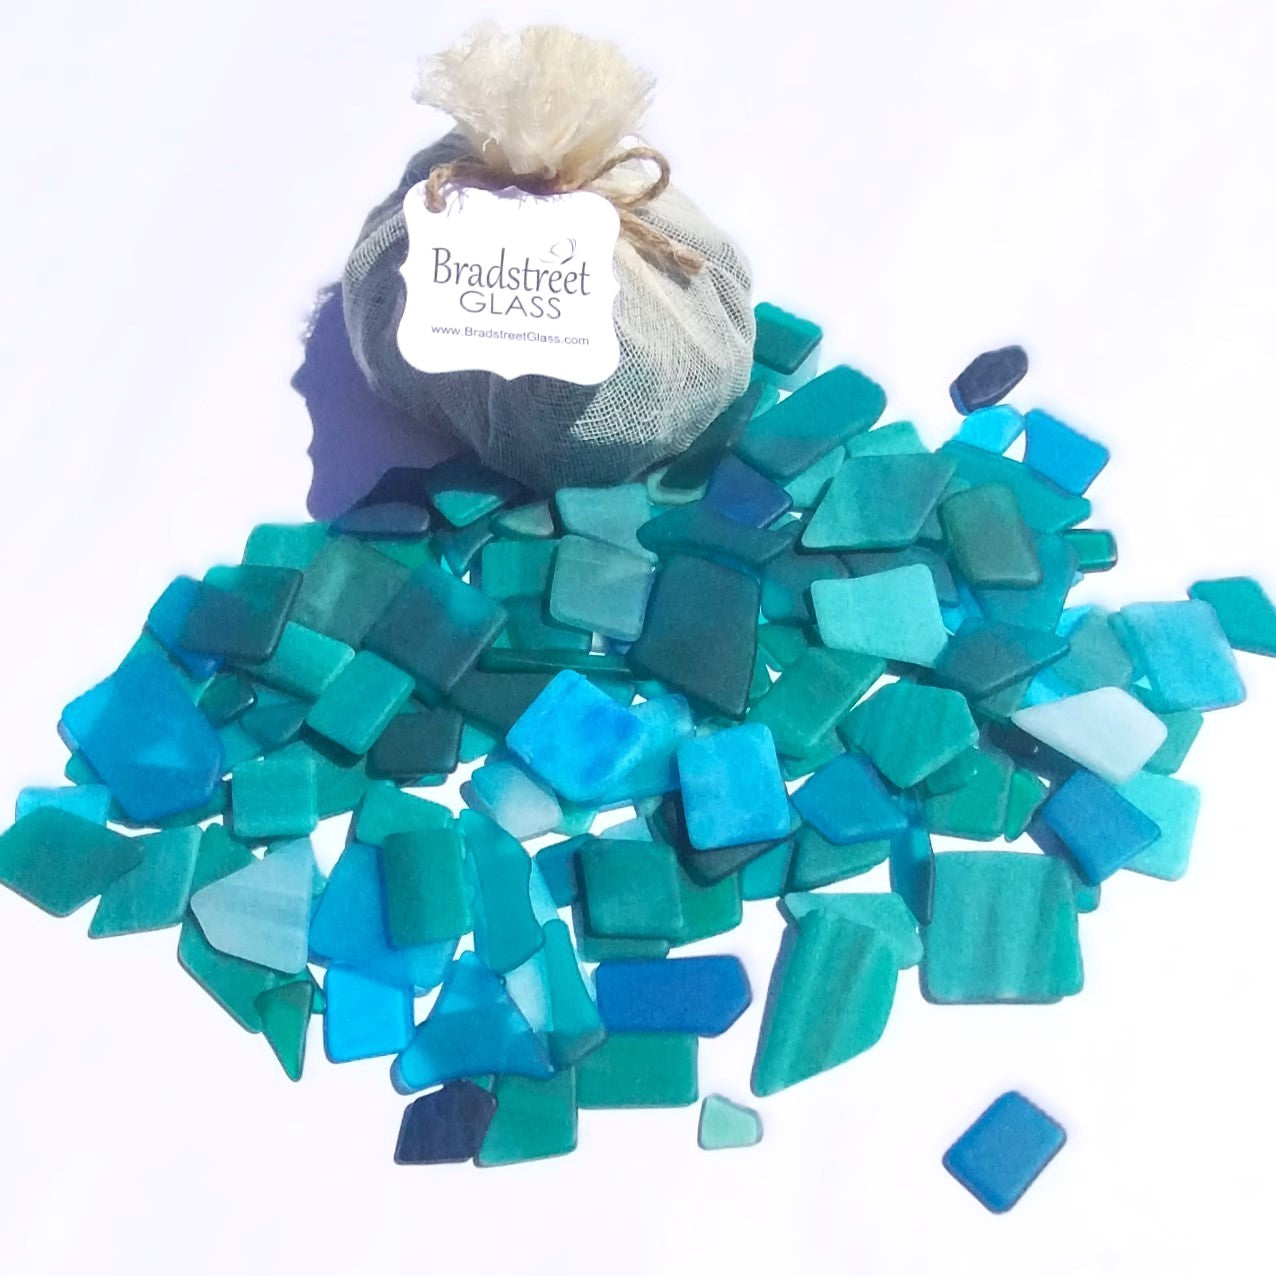 Bradstreet Glass Aqua Blue Teal Green Tumbled Stained Glass 1/2 pound "Sea Glass" in Shades of Teal and Aqua